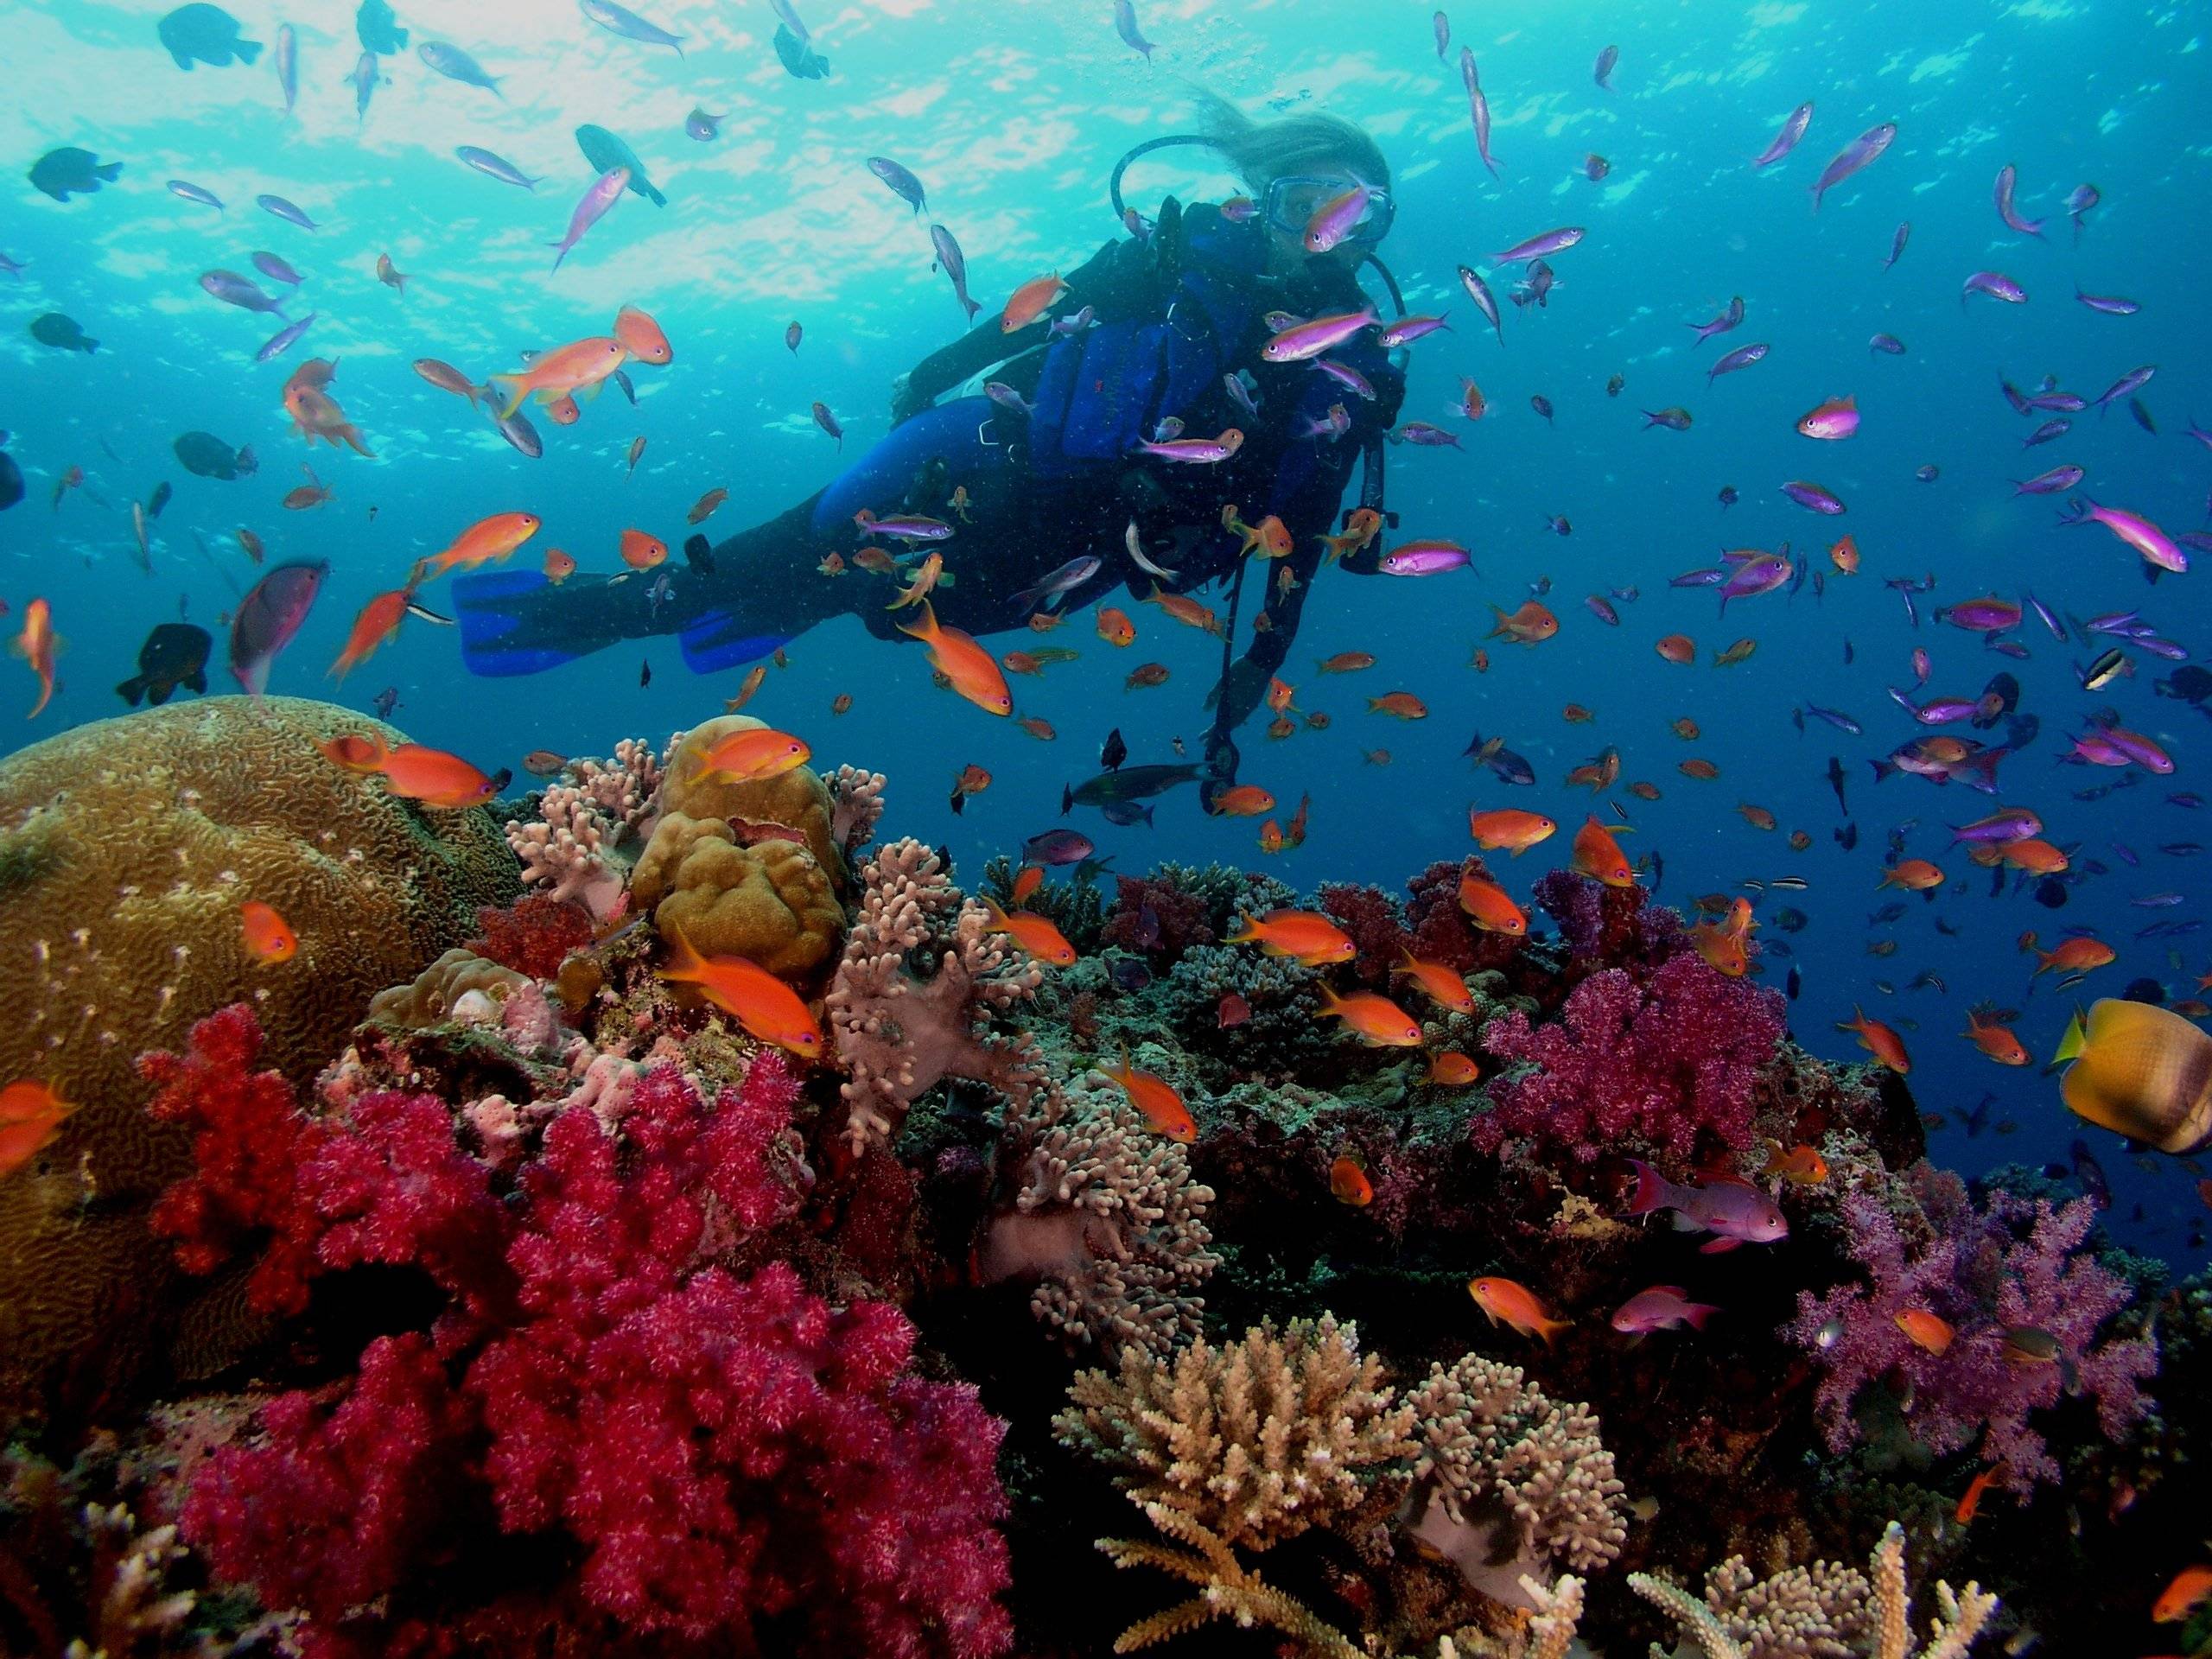 Free Scuba Diving Wallpapers